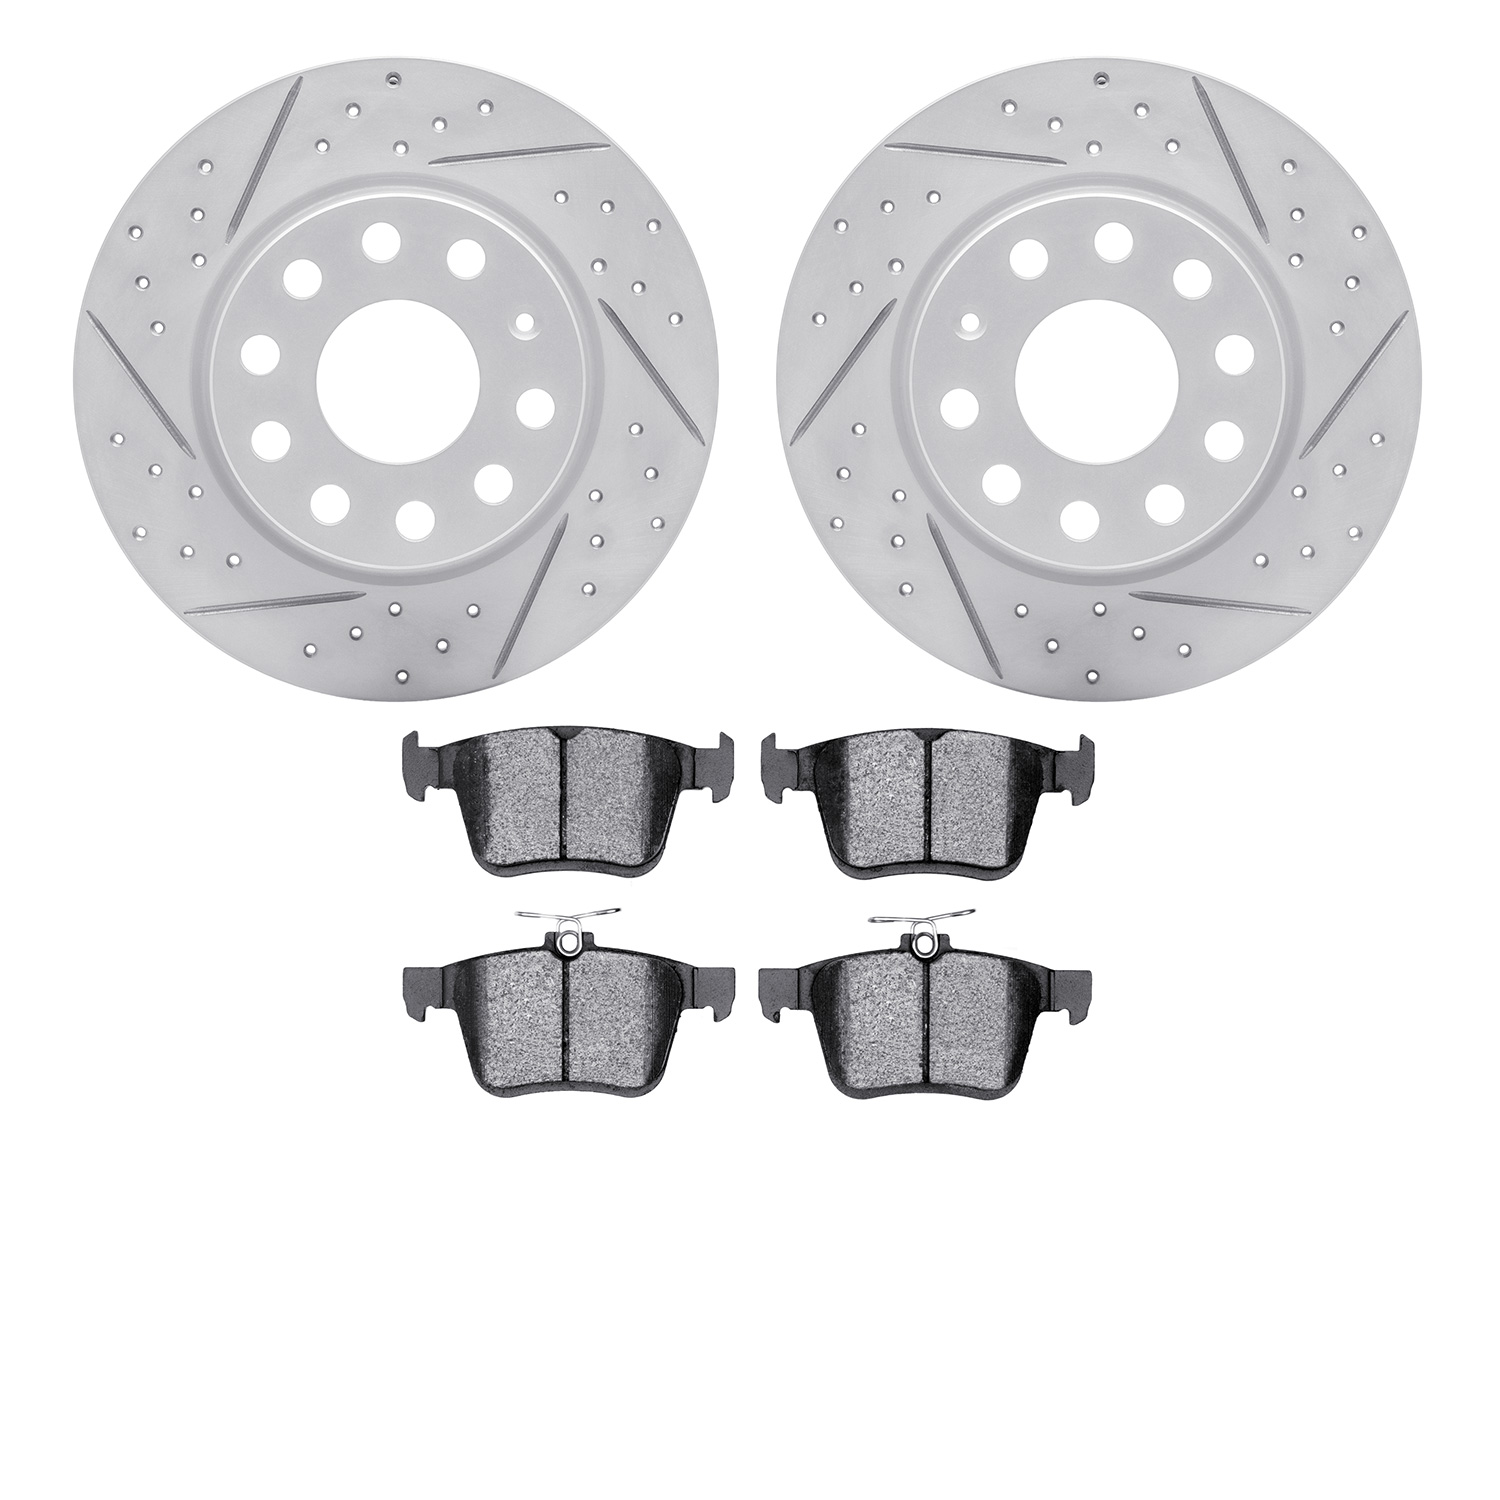 2502-74081 Geoperformance Drilled/Slotted Rotors w/5000 Advanced Brake Pads Kit, Fits Select Audi/Volkswagen, Position: Rear